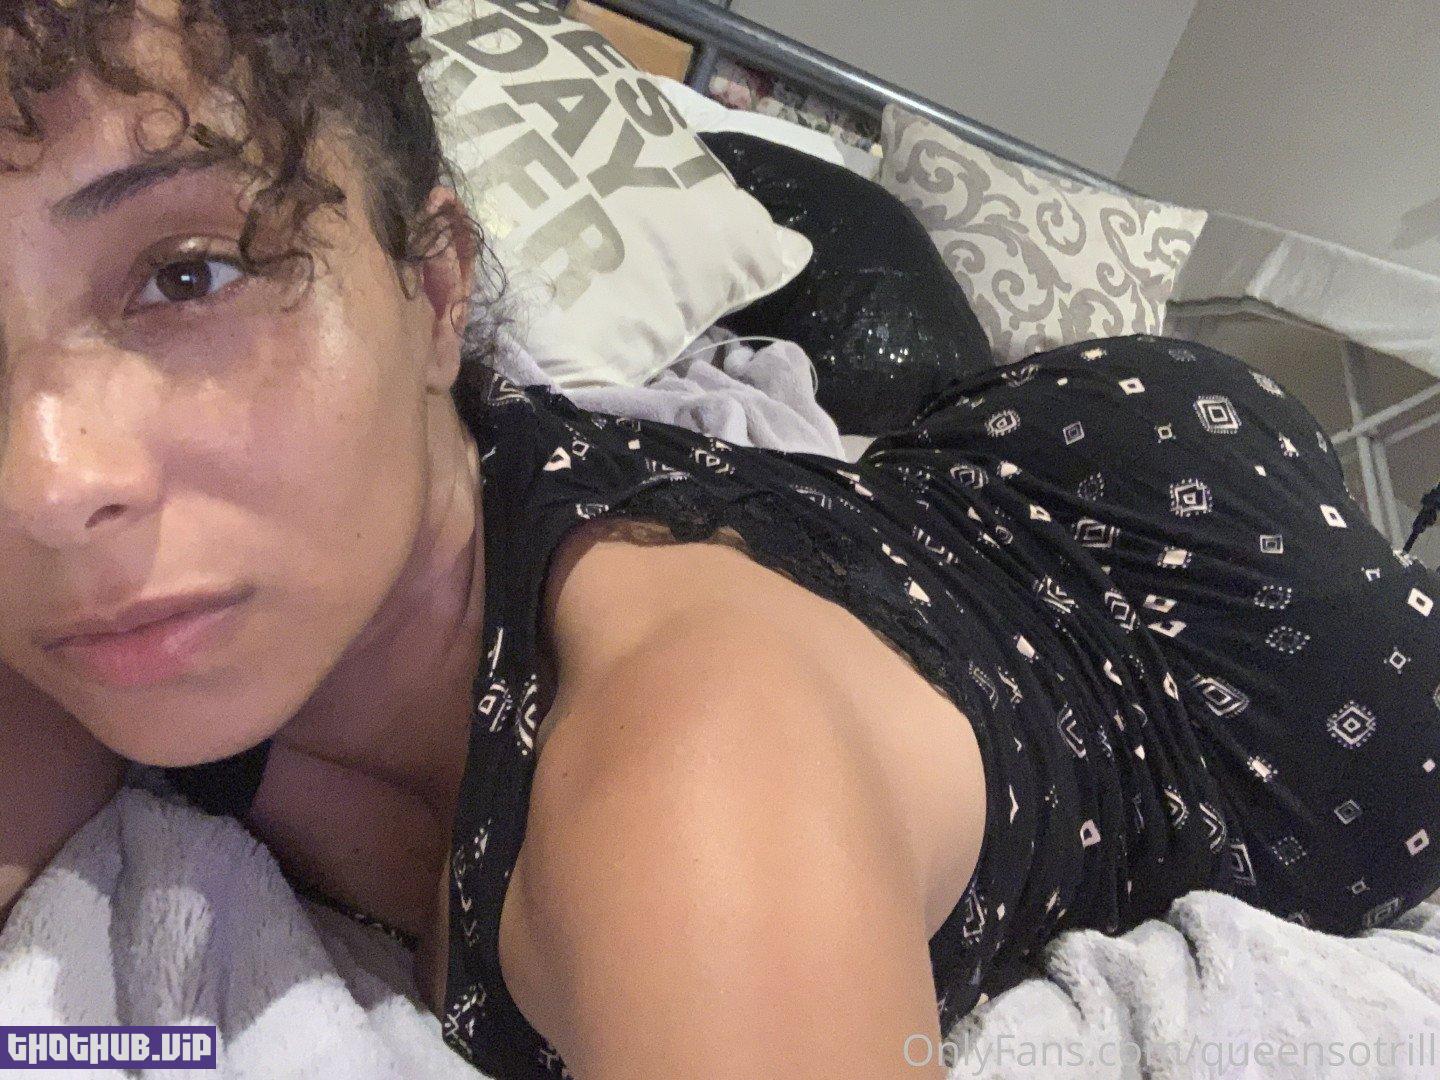 QueenSoTrill (queensotrill) Onlyfans Leaks (144 images)